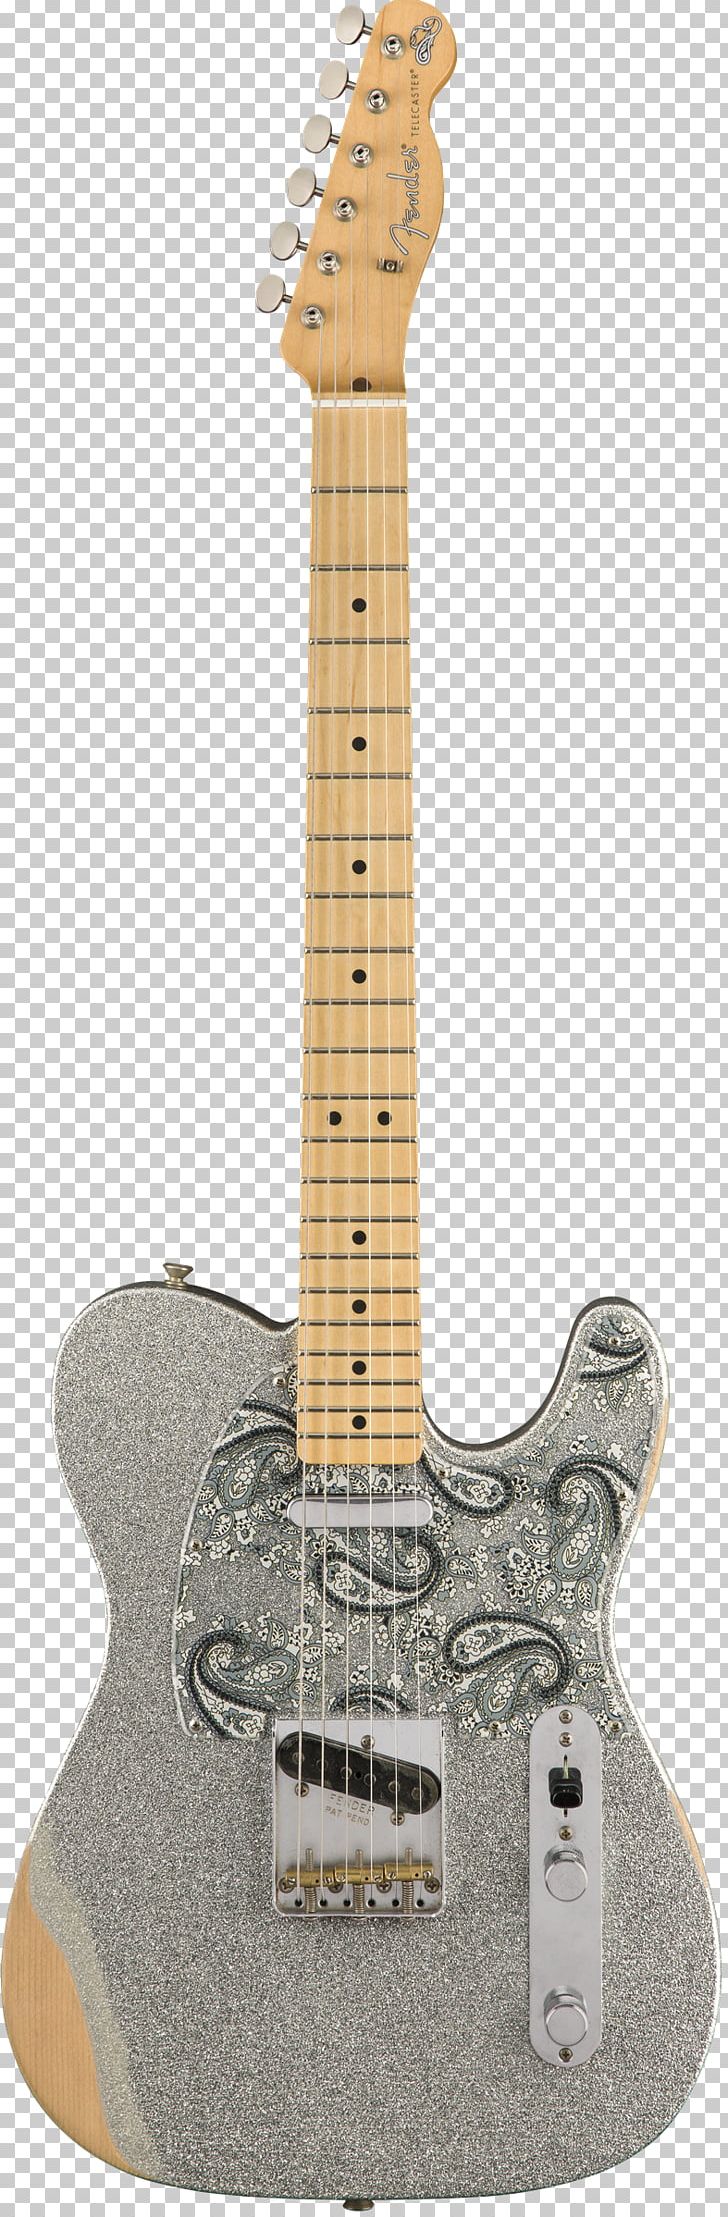 Fender Telecaster Thinline Guitar Musical Instruments Fender Stratocaster PNG, Clipart, Acoustic Electric Guitar, Bass Guitar, Brad Paisley, Guitar, Guitar Accessory Free PNG Download